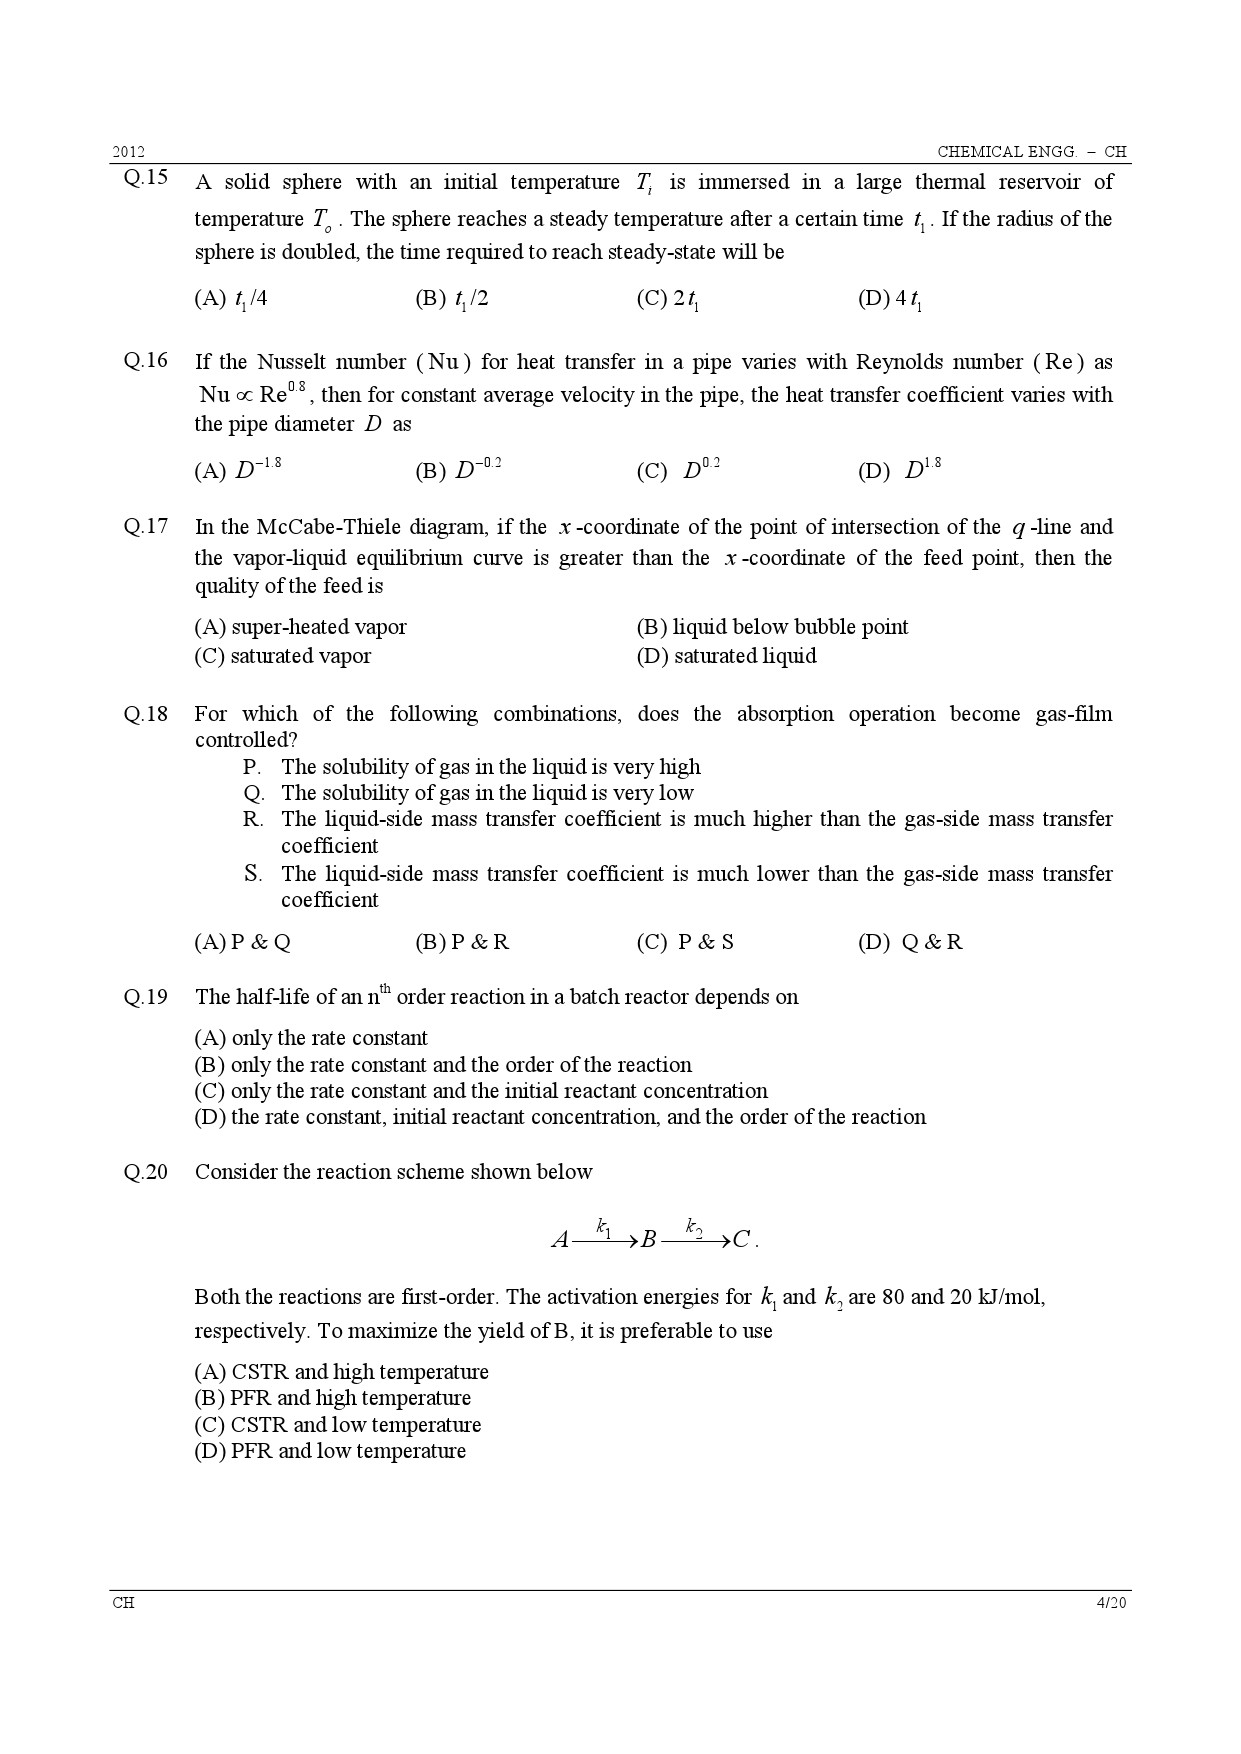 GATE Exam Question Paper 2012 Chemical Engineering 4